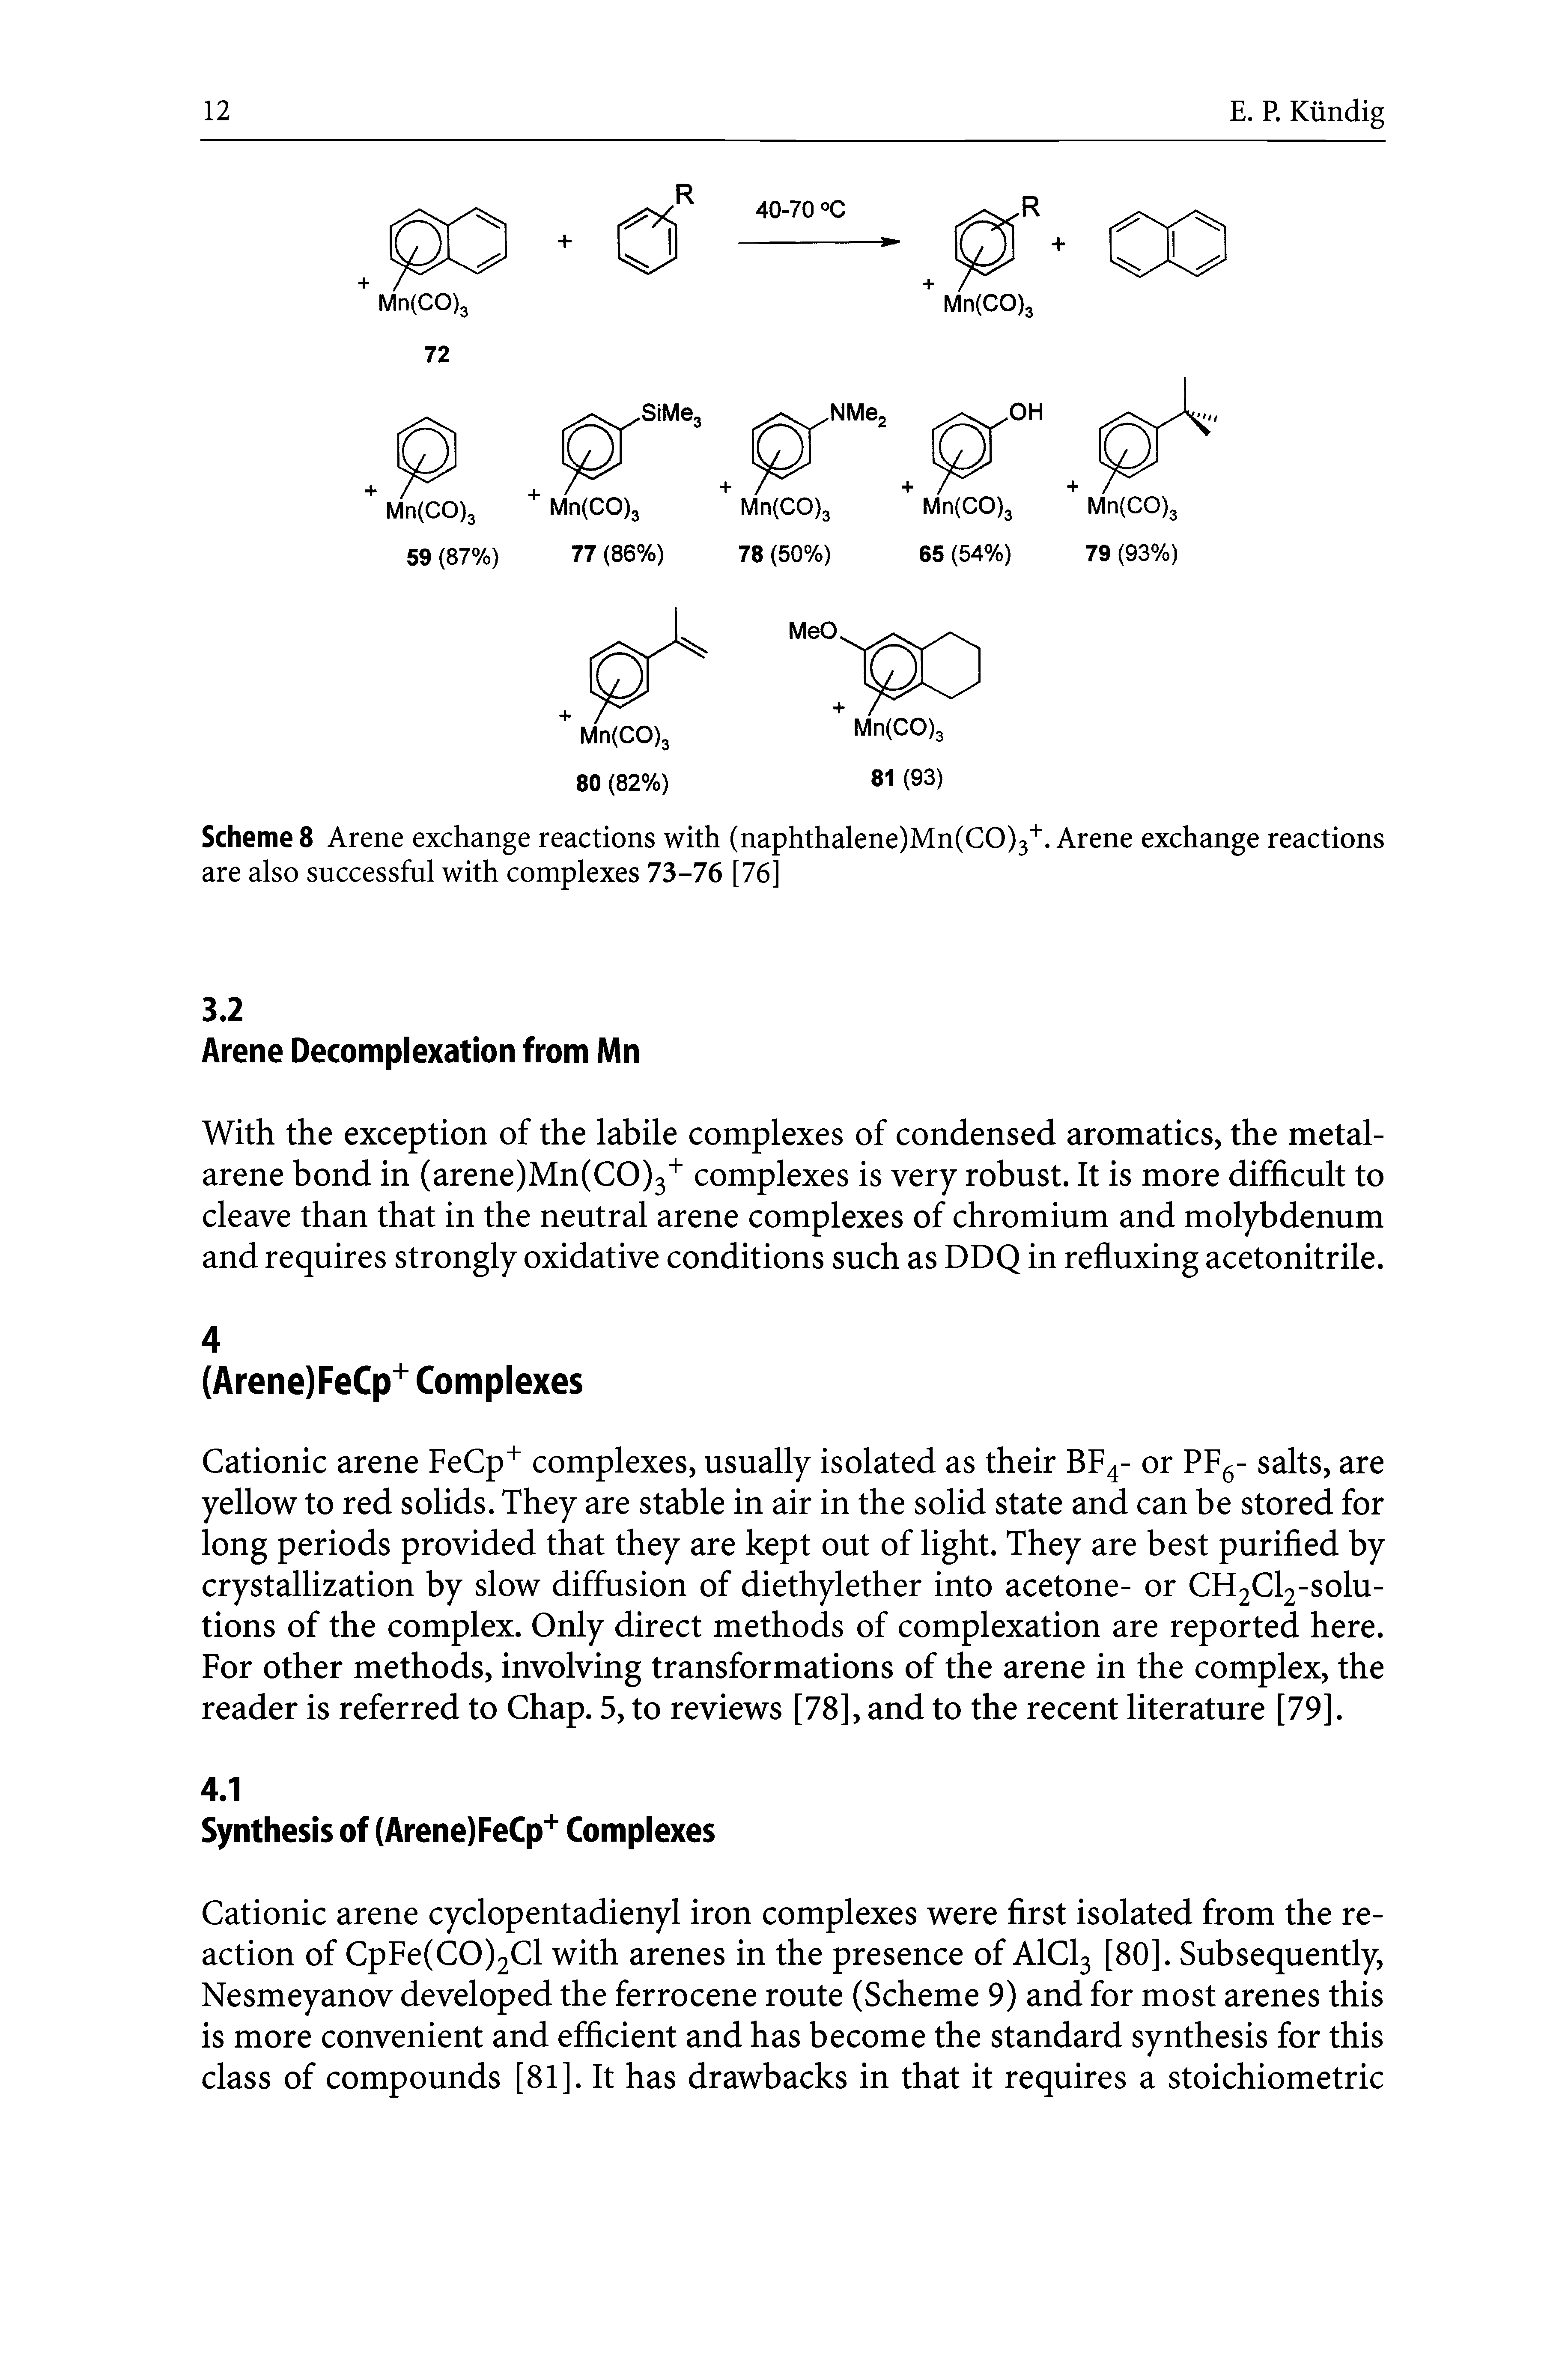 Scheme 8 Arene exchange reactions with (naphthalene)Mn(CO)3. Arene exchange reactions are also successful with complexes 73-76 [76]...